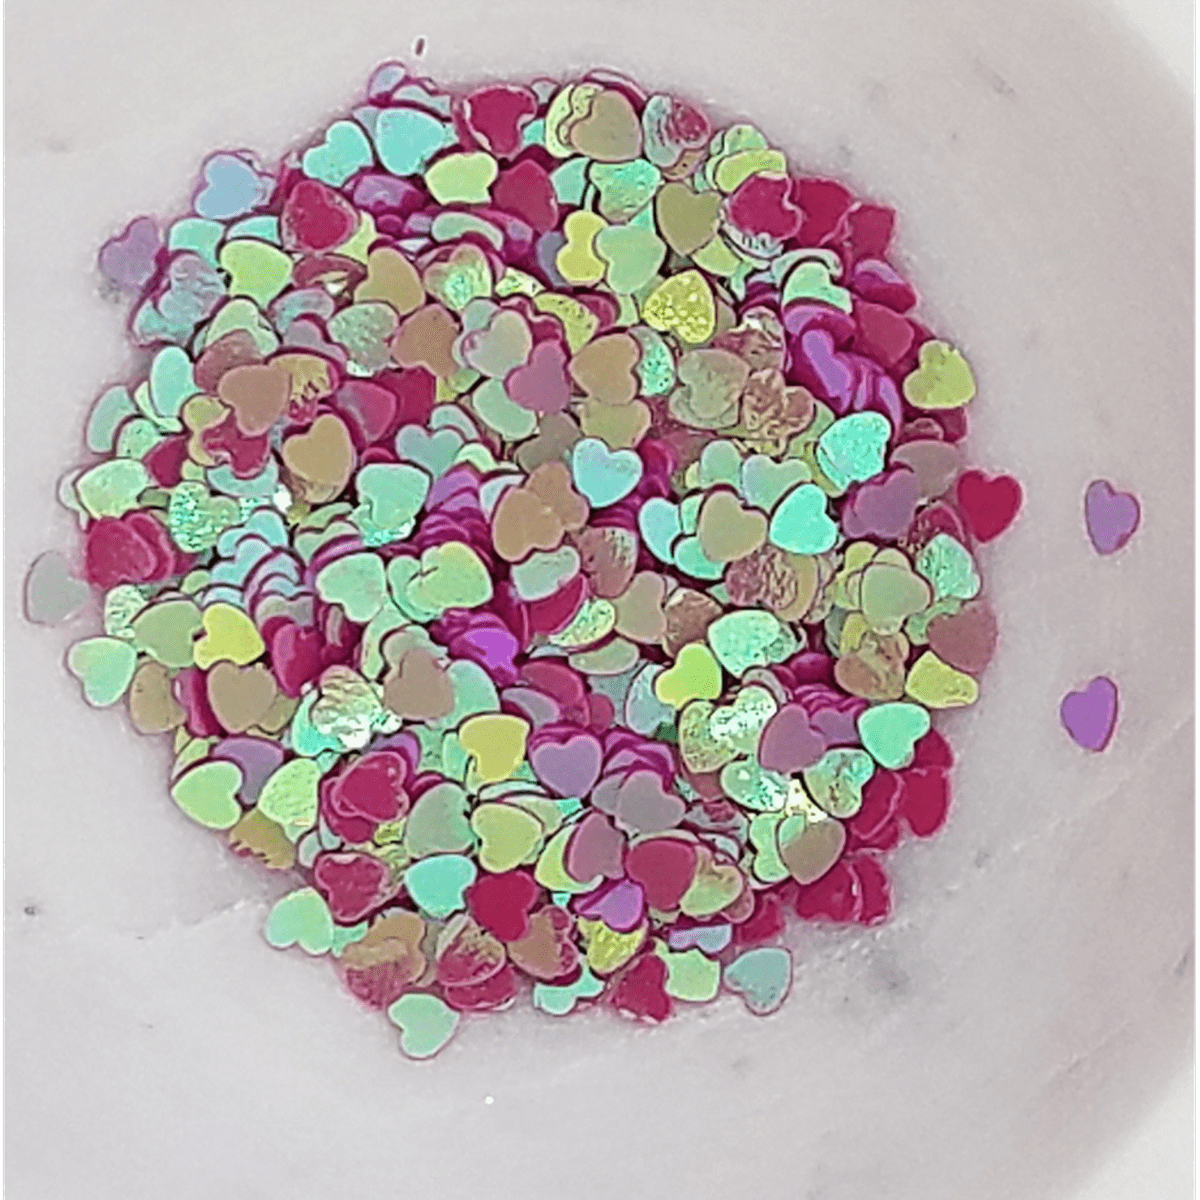 4mm Magenta (AB) Solid Heart Sequins - Kat Scrappiness